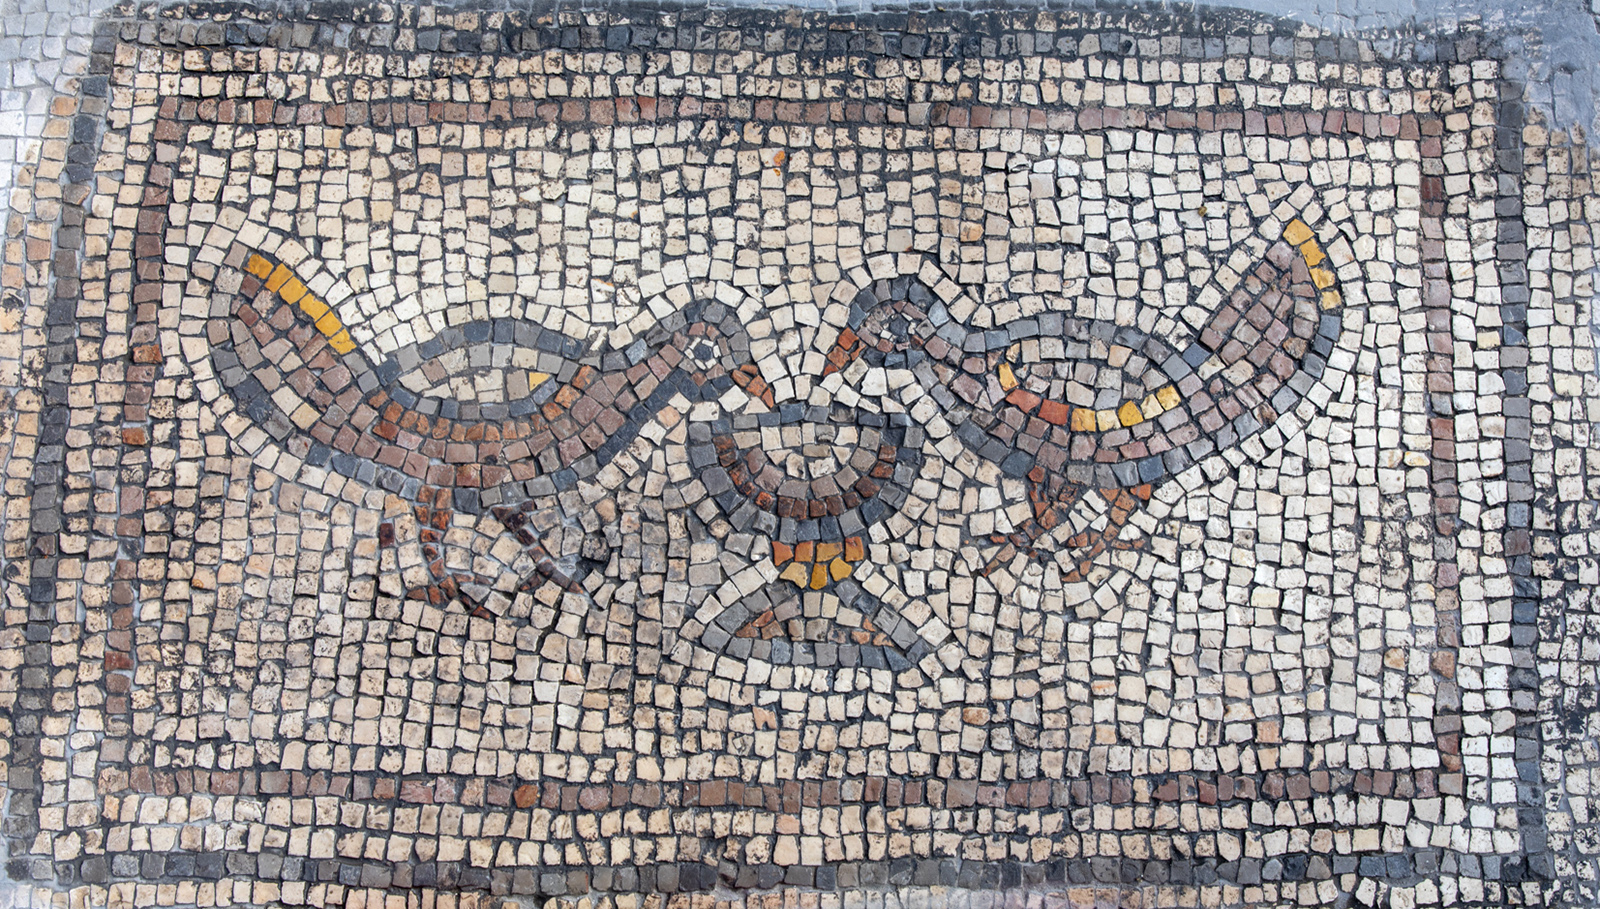 Hippos mosaic detail: birds drinking from a goblet of wine. Photo by Michael Eisenberg